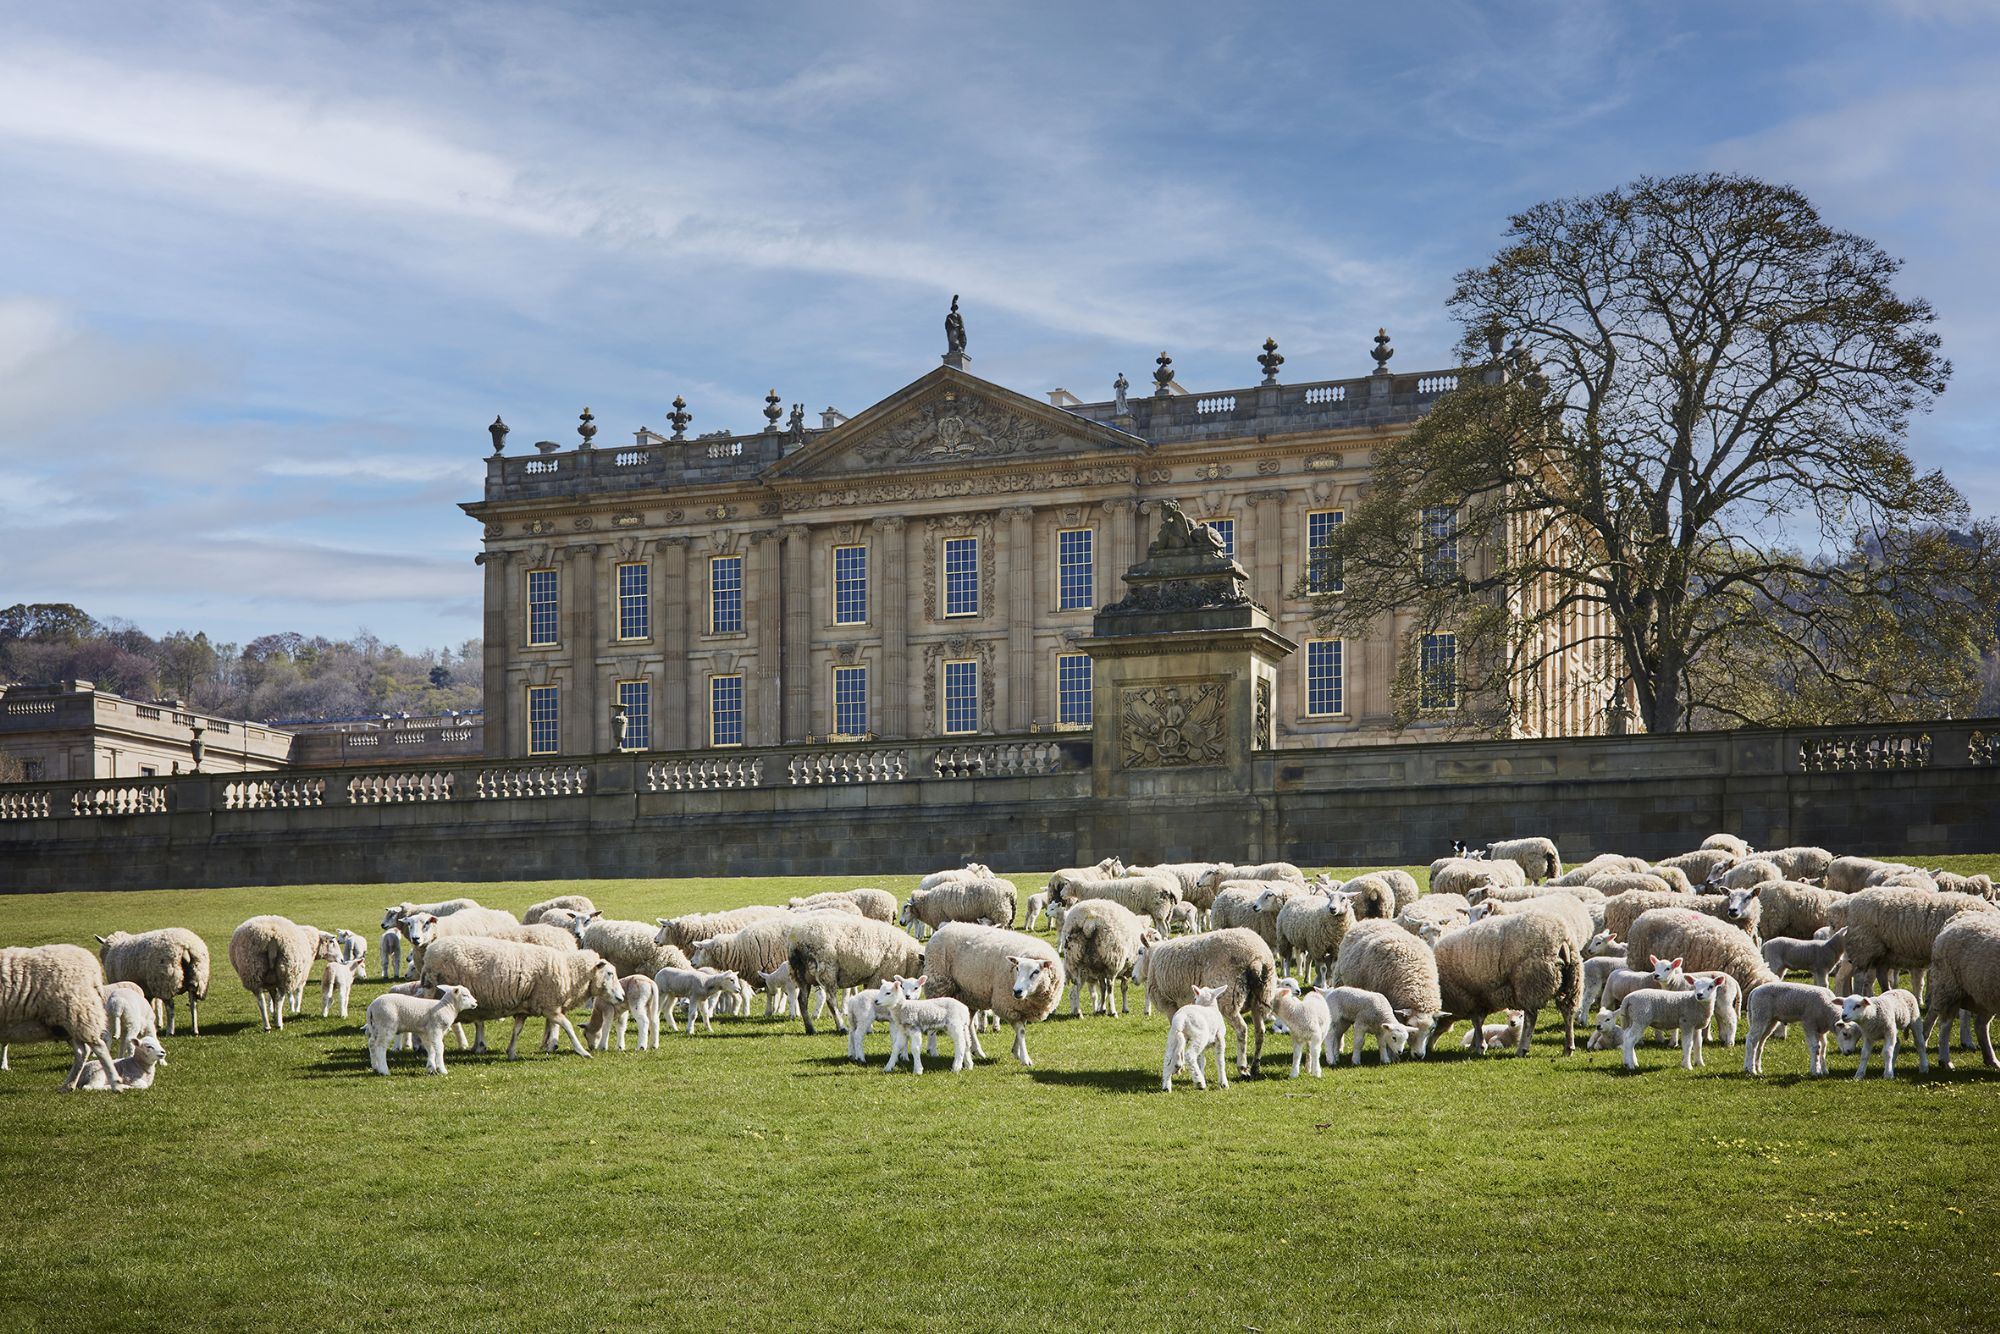 Sheep and lambs infront of Chatsworth house